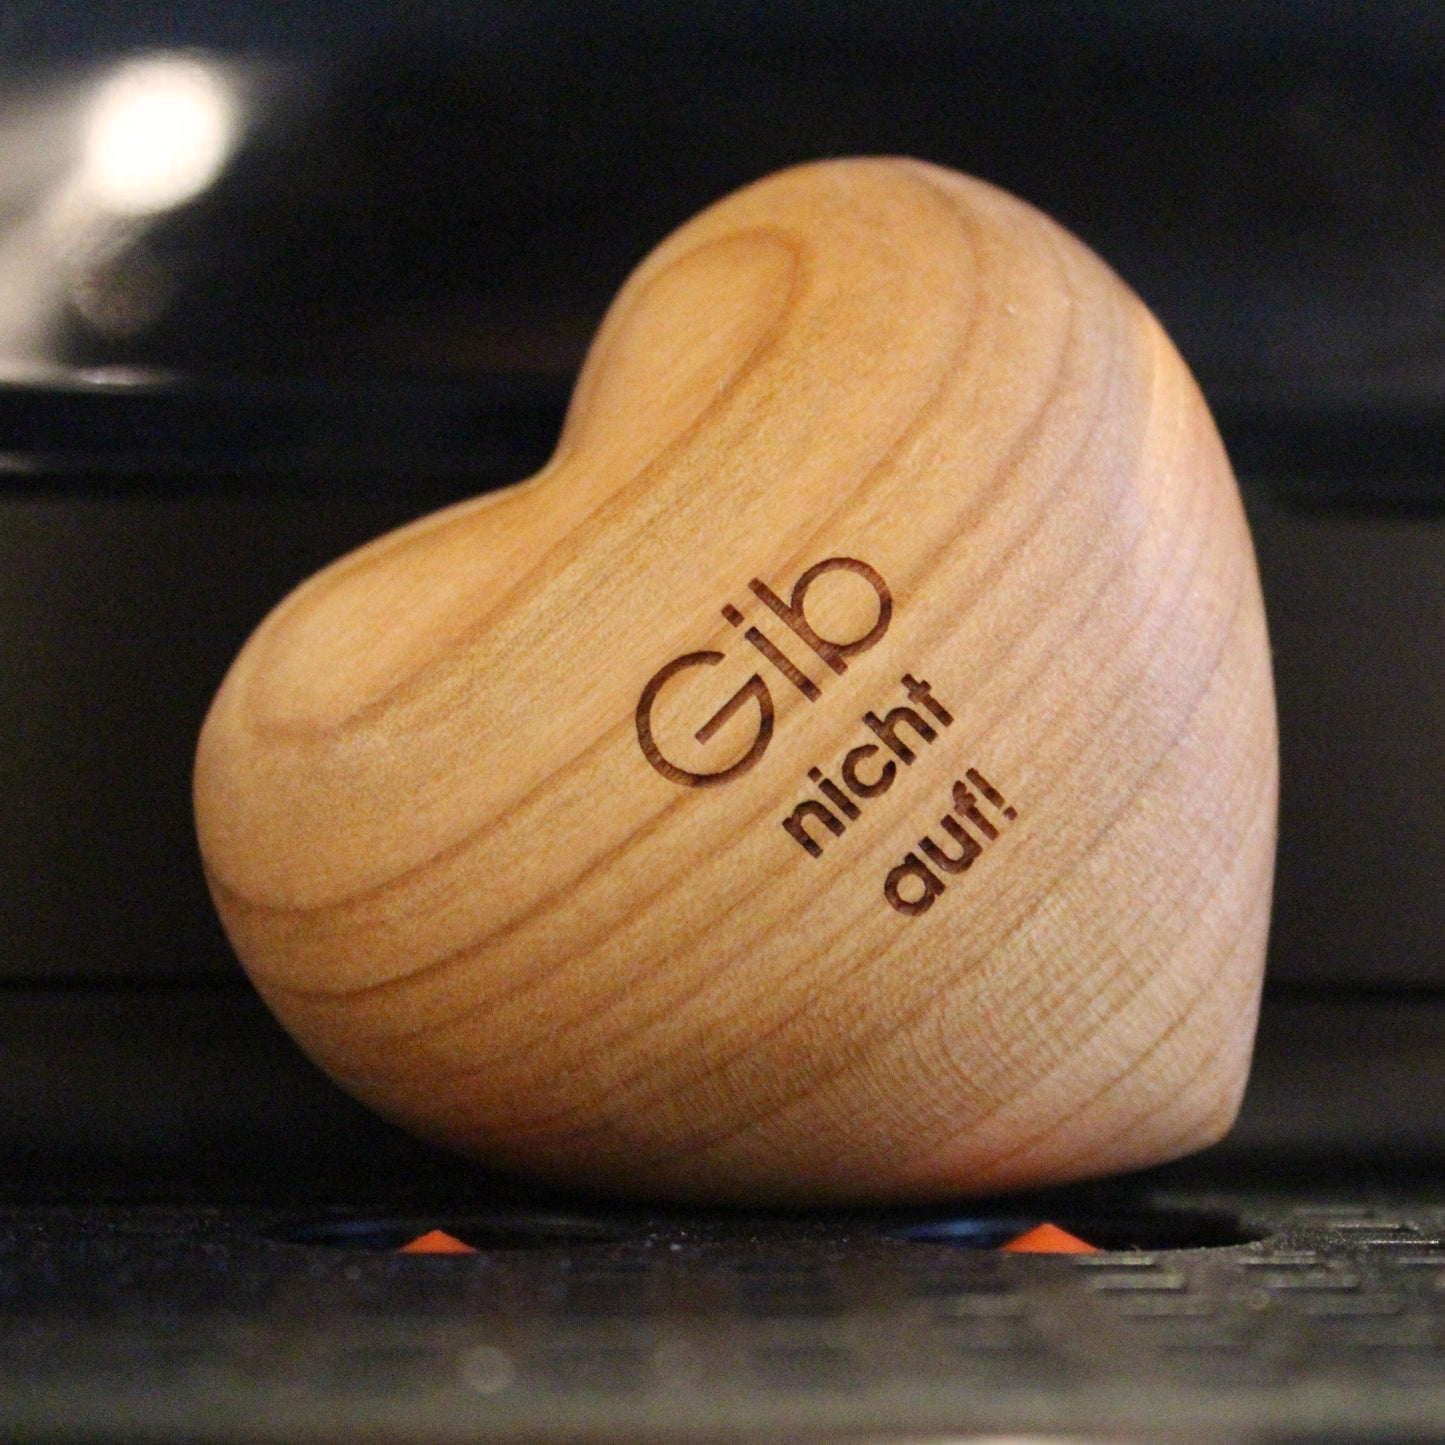 Thankgoods wooden heart 'Don't give up!'